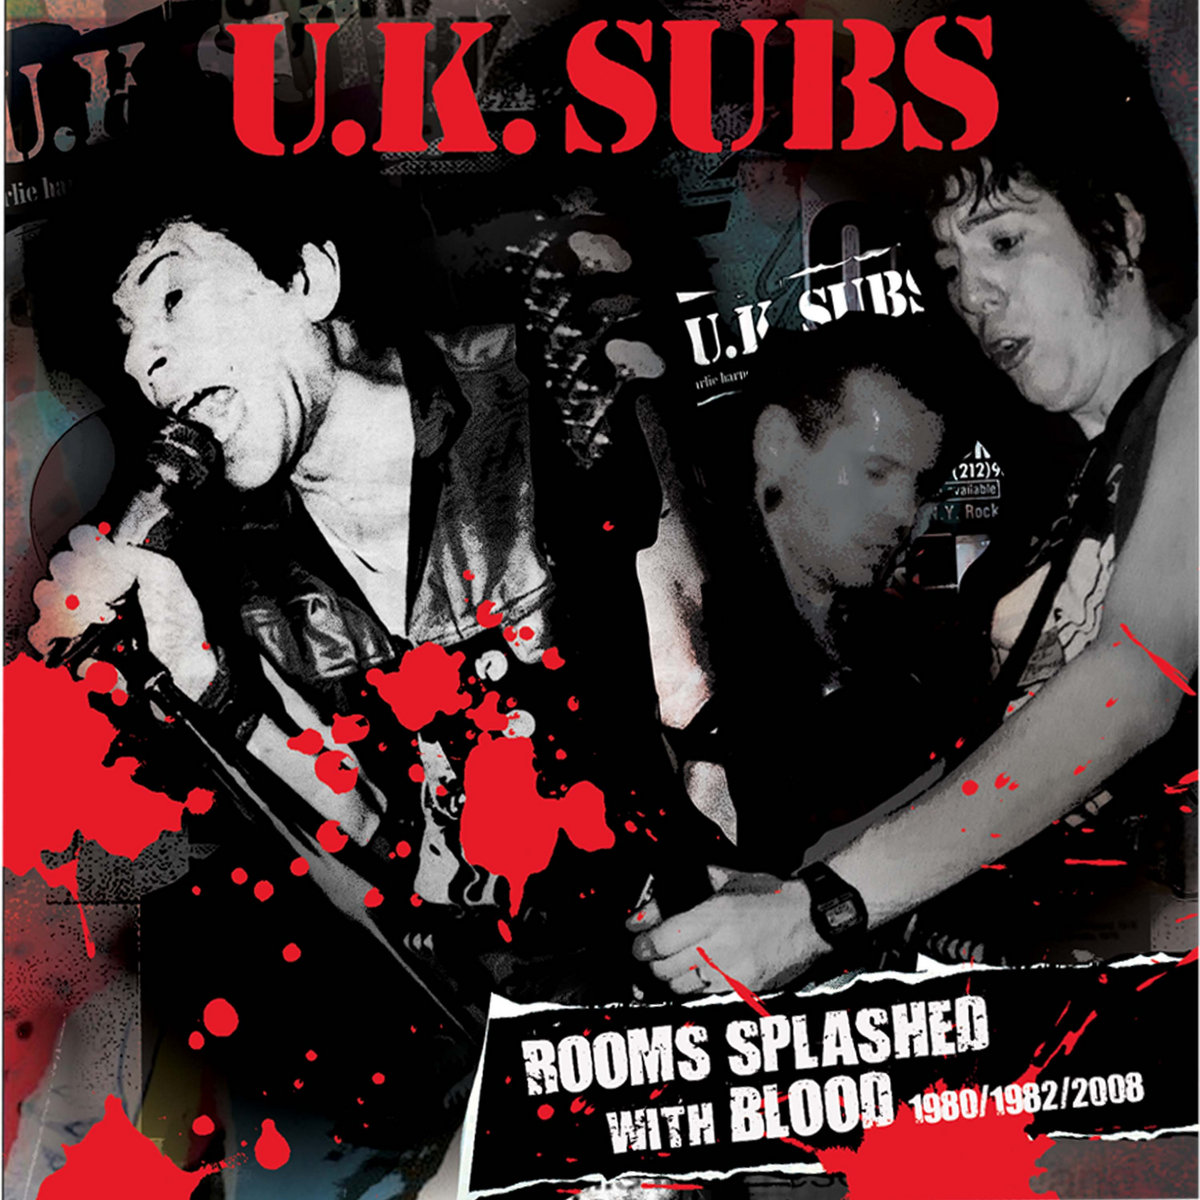 U.K. Subs To Release 3 CD Box Set Called Rooms Splashed With Blood: 1980​/​1982​/​2008